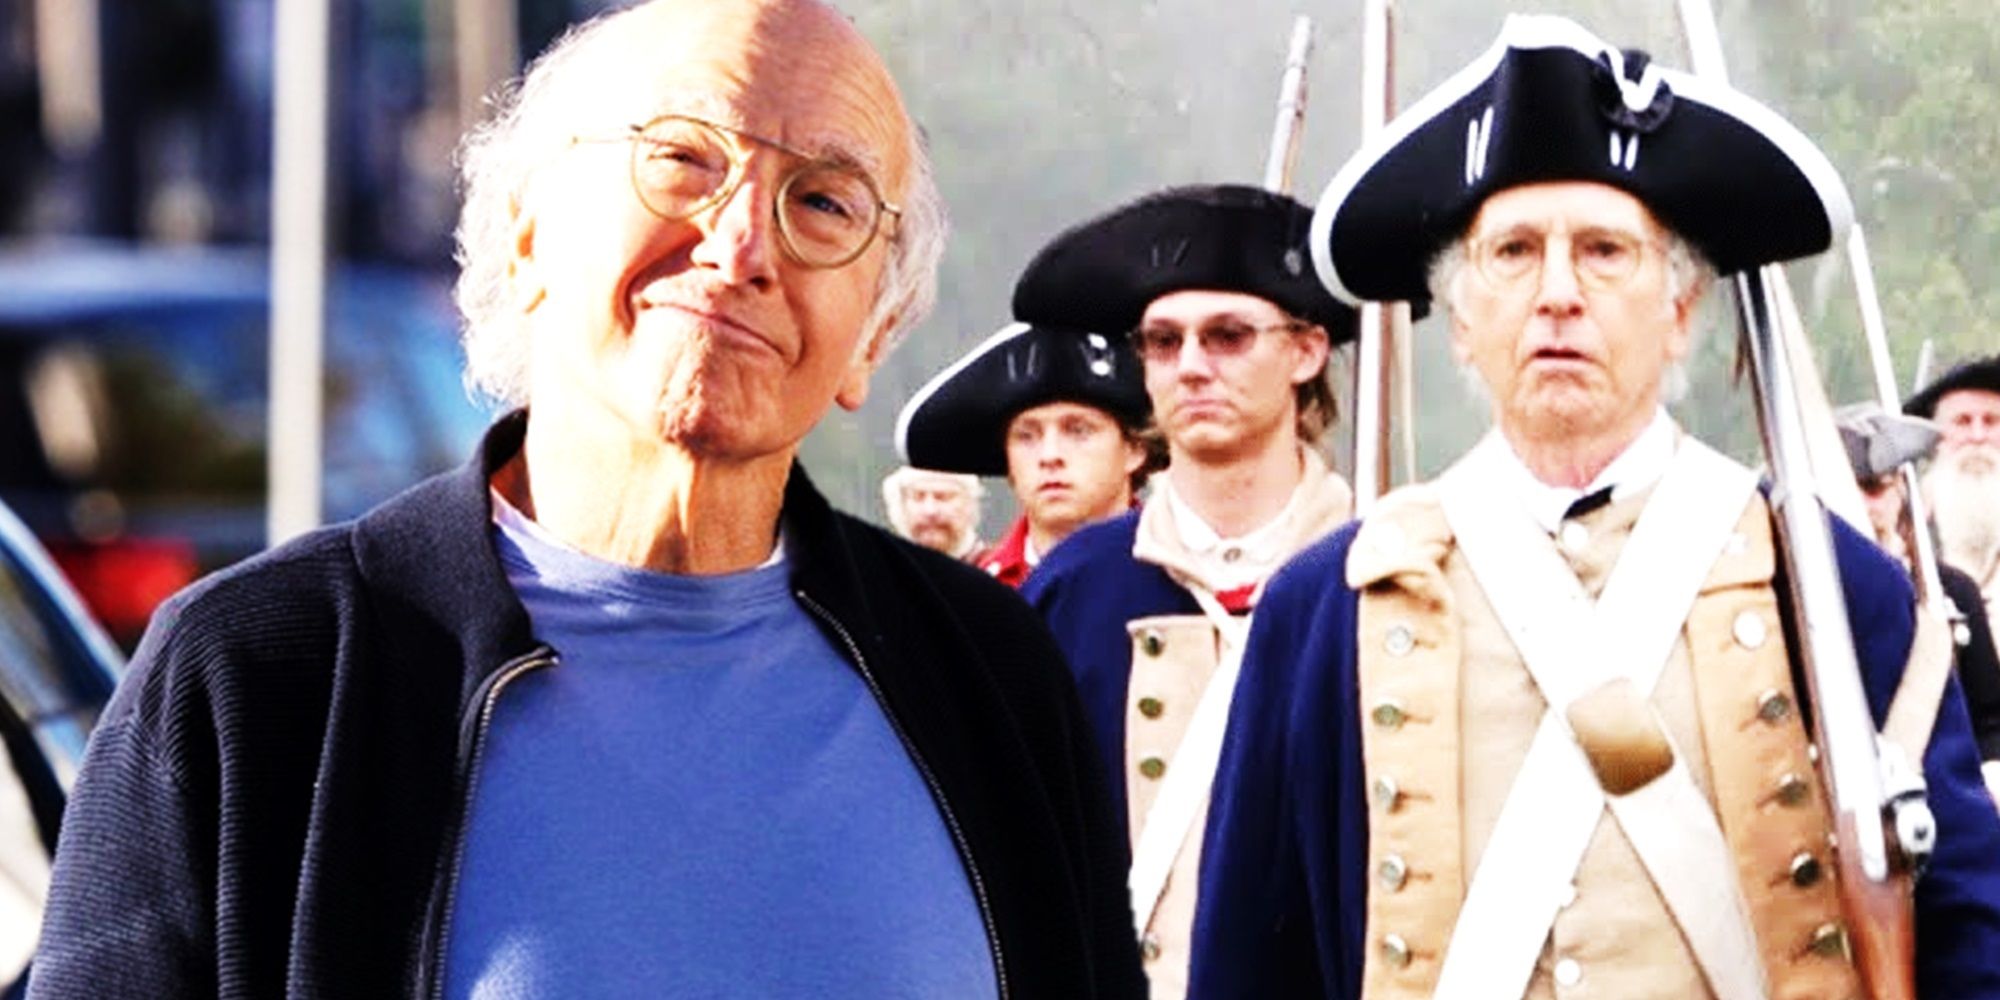 Collage of Larry David in a parking lot and at a Revolutionary War reenactment in Curb Your Enthusiasm